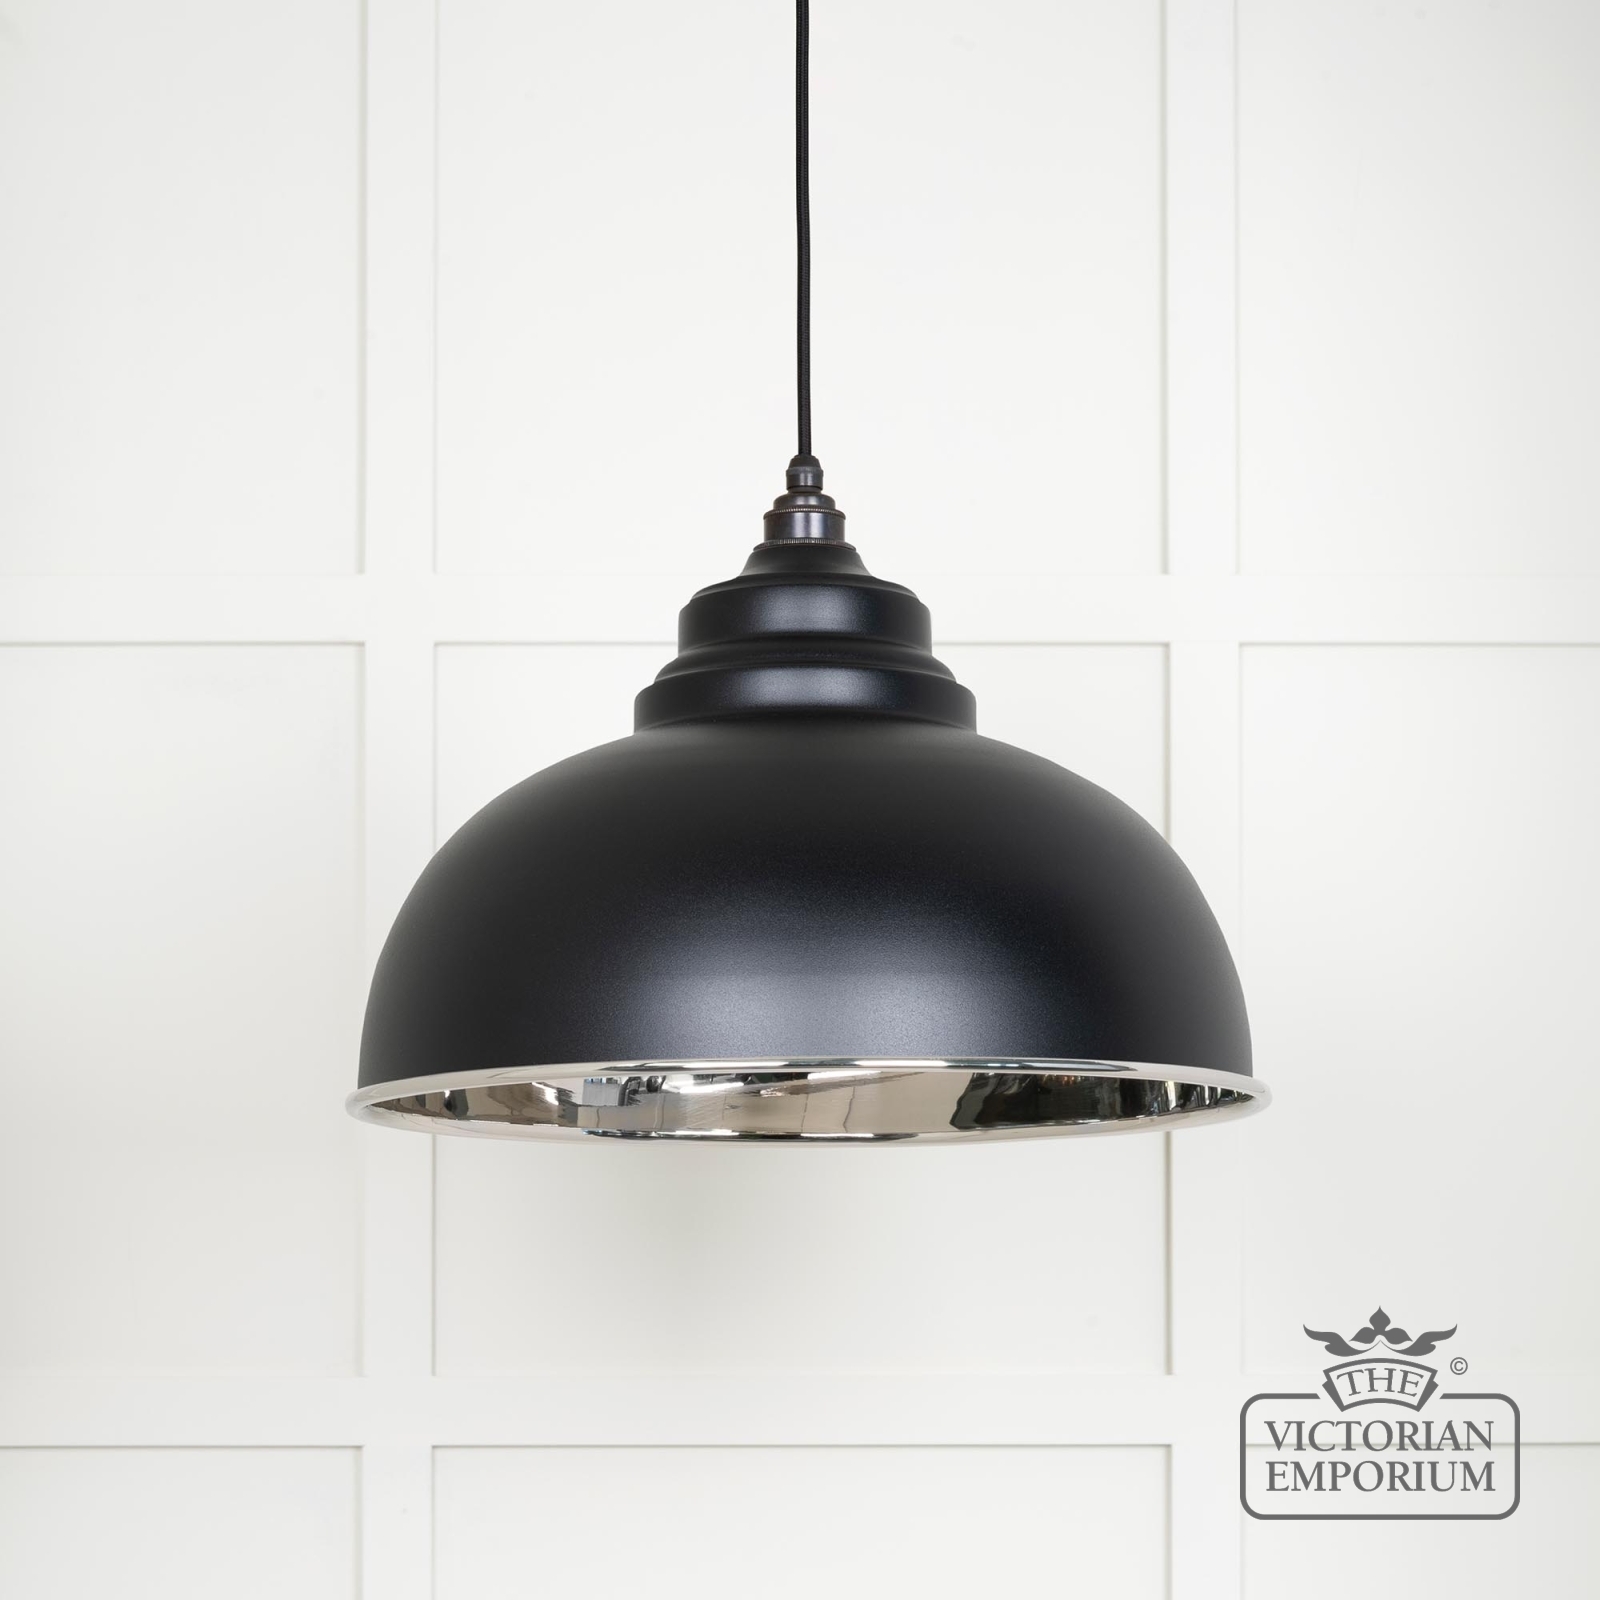 Harlow pendant light in smooth nickel with Black exterior